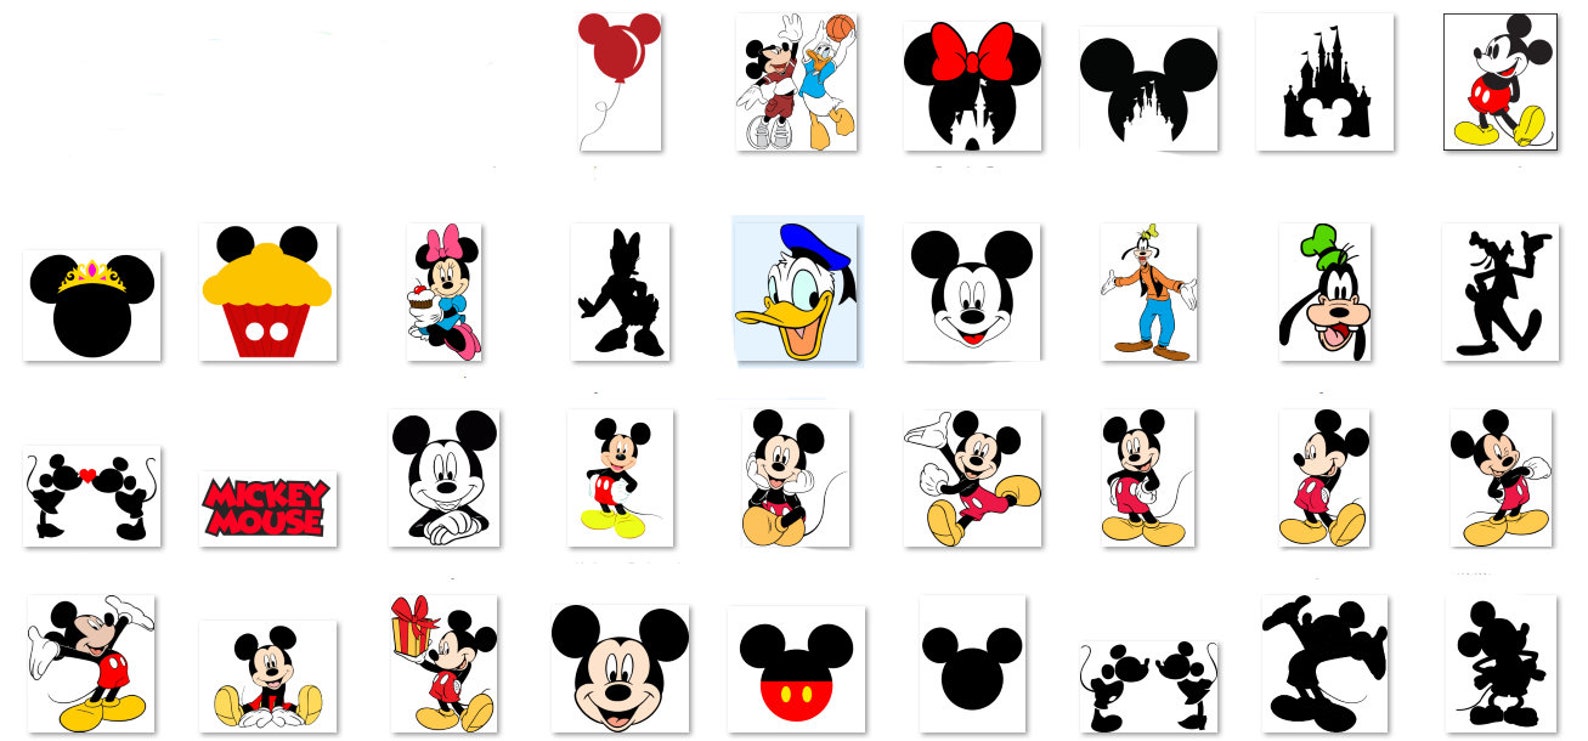 Cute Mickey Mouse characters.